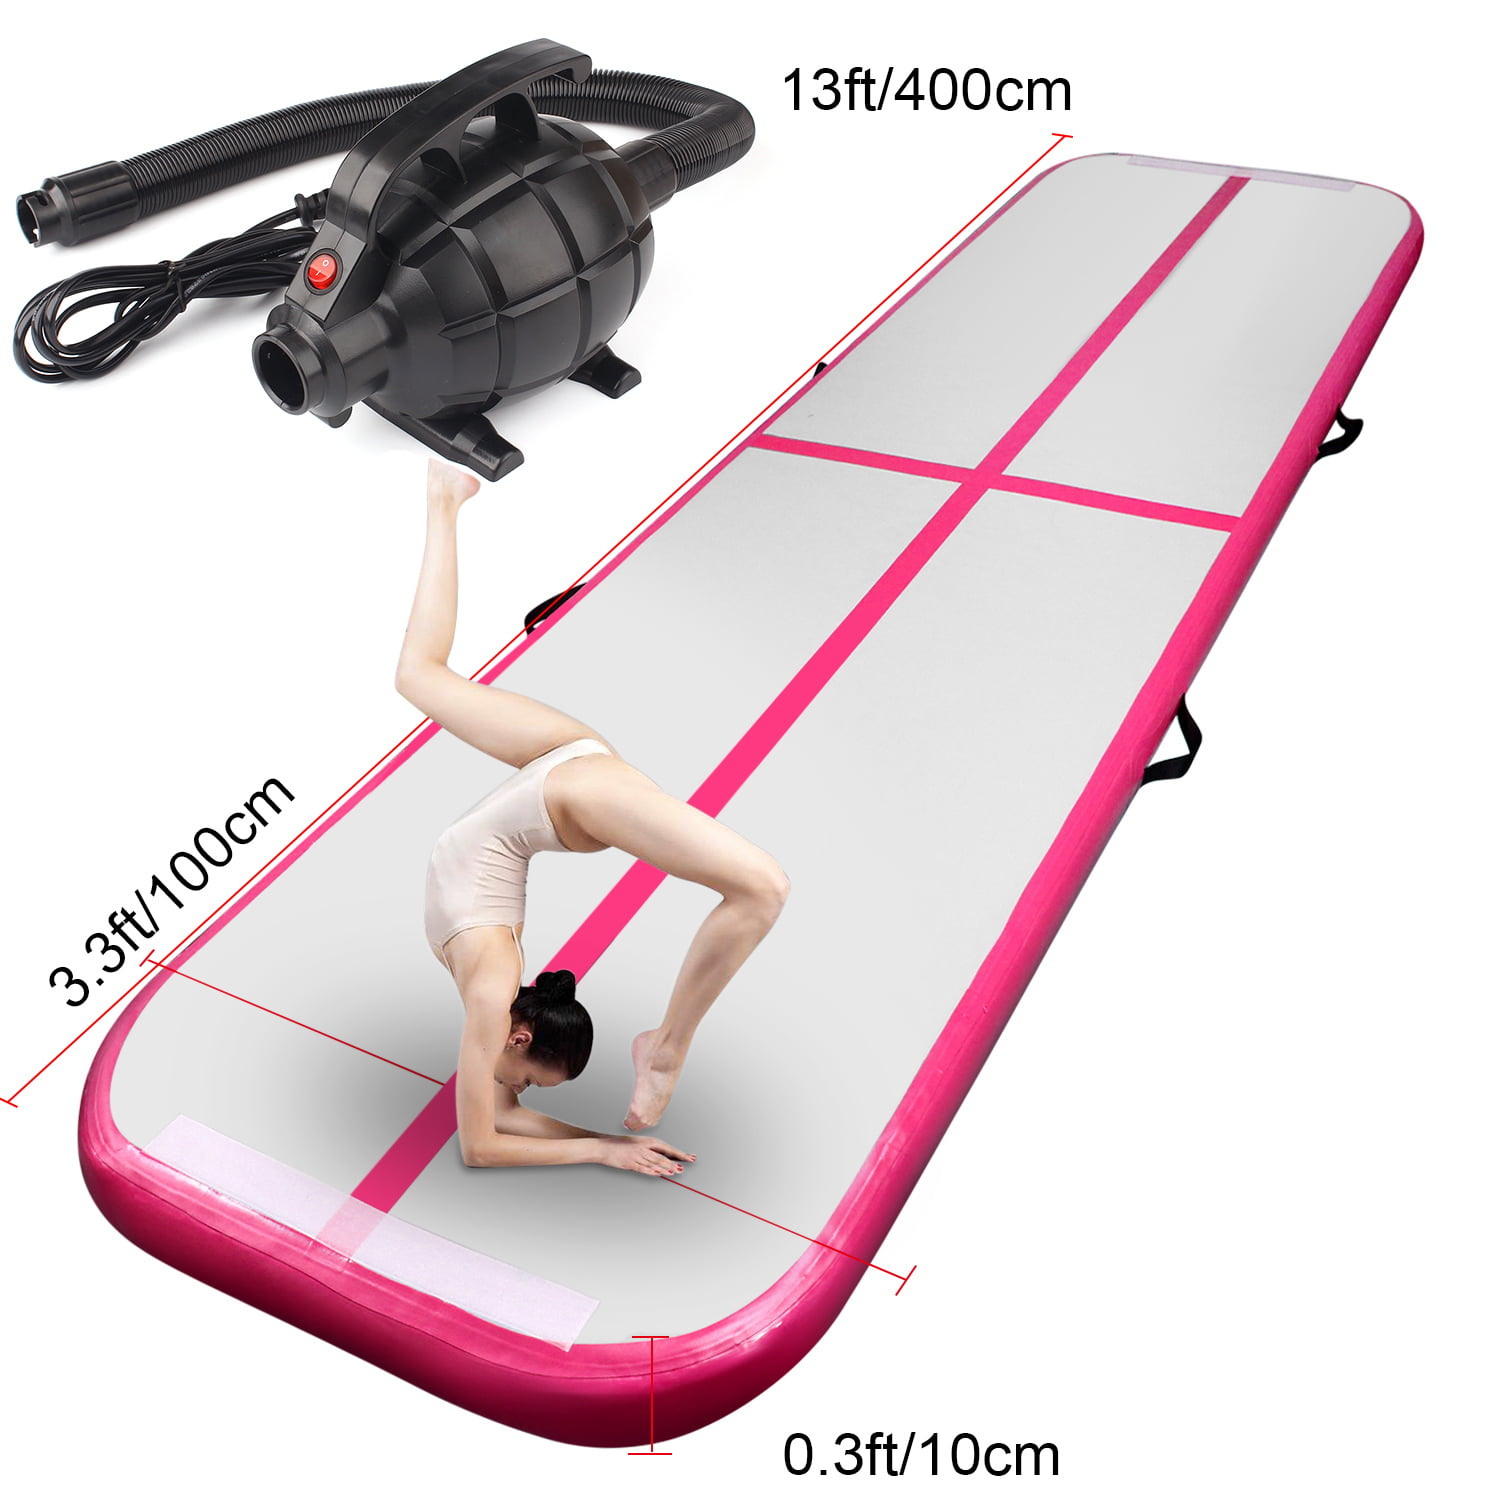 FBSPORT 8inches/4 inches Thickness airtrack mat,26ft/23ft/20ft/17ft/13ft/10ft Tumble Track air mat for Gymnastics Training/Home Use/Cheerleading/Yoga/Water with Electric Pump 